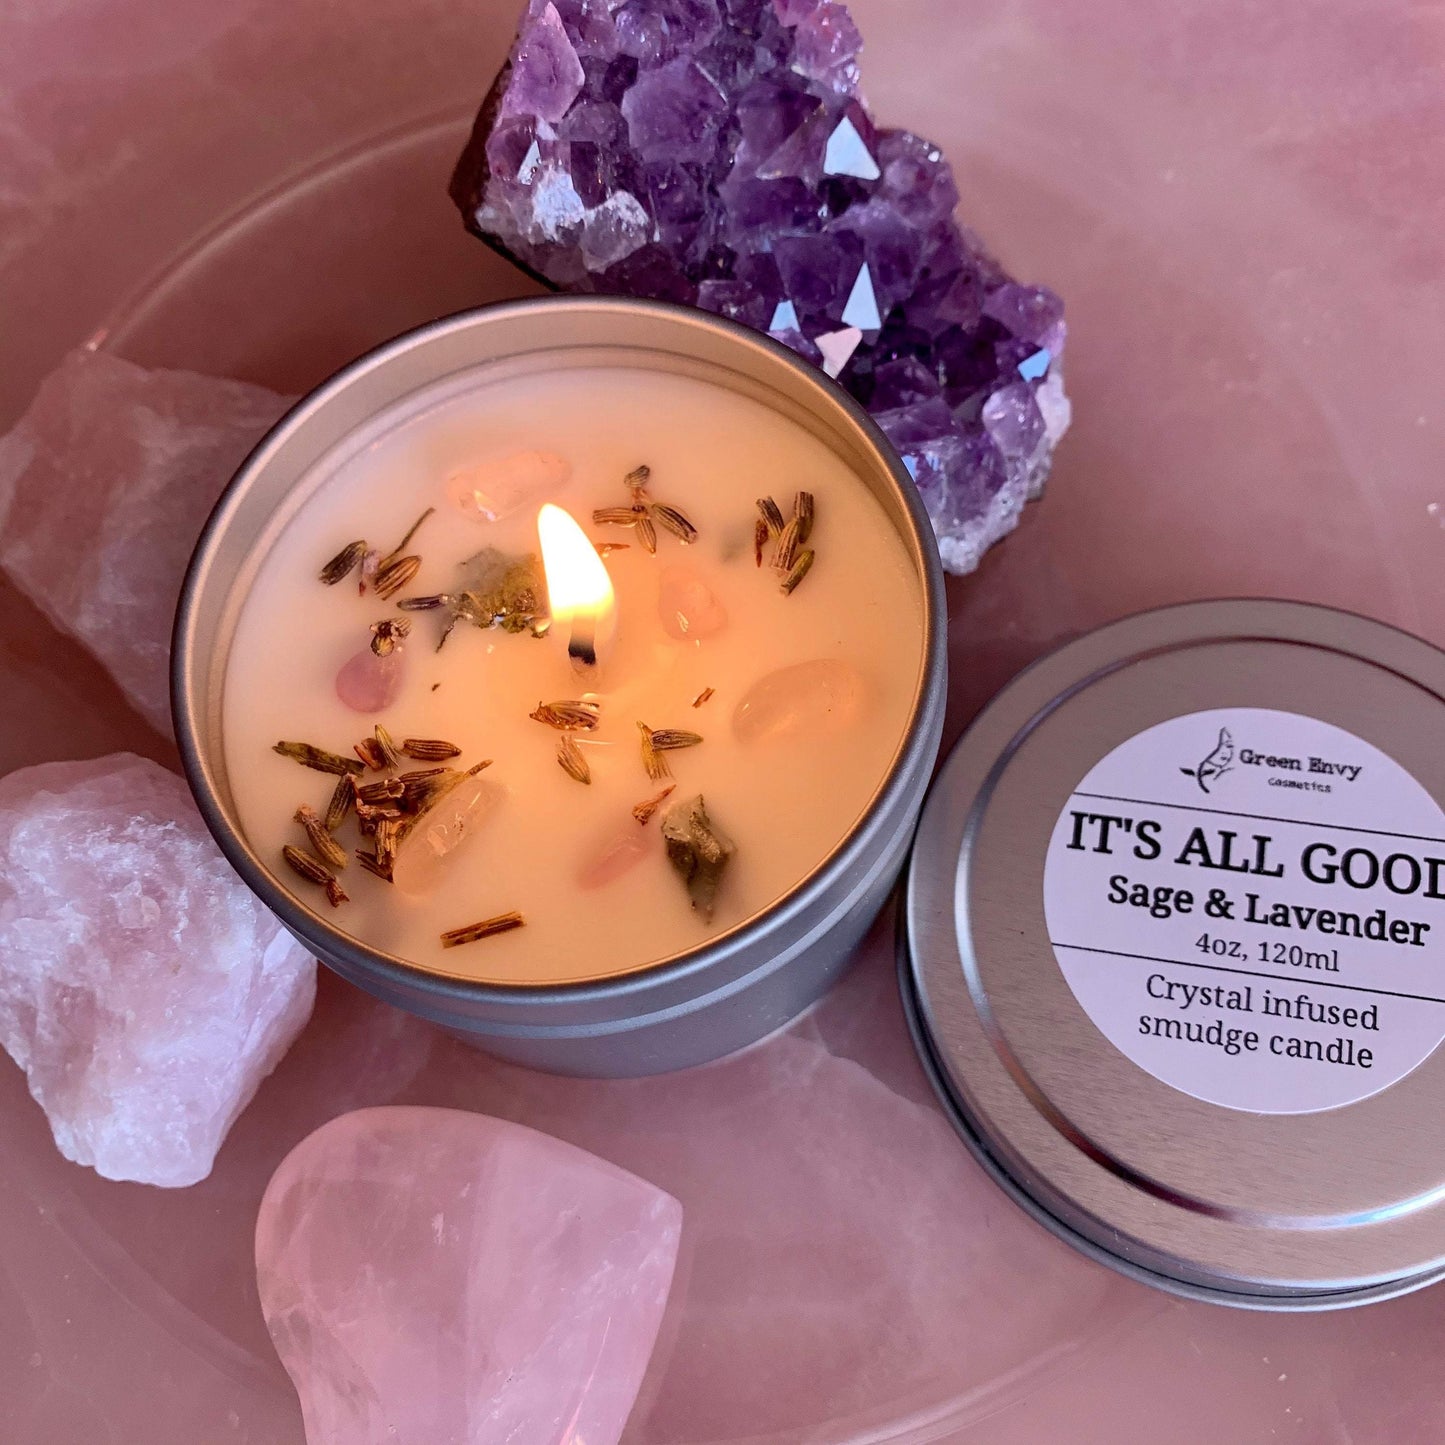 IT'S ALL GOOD- CRYSTAL INFUSED SMUDGE CANDLE - GreenEnvyCosmetics 